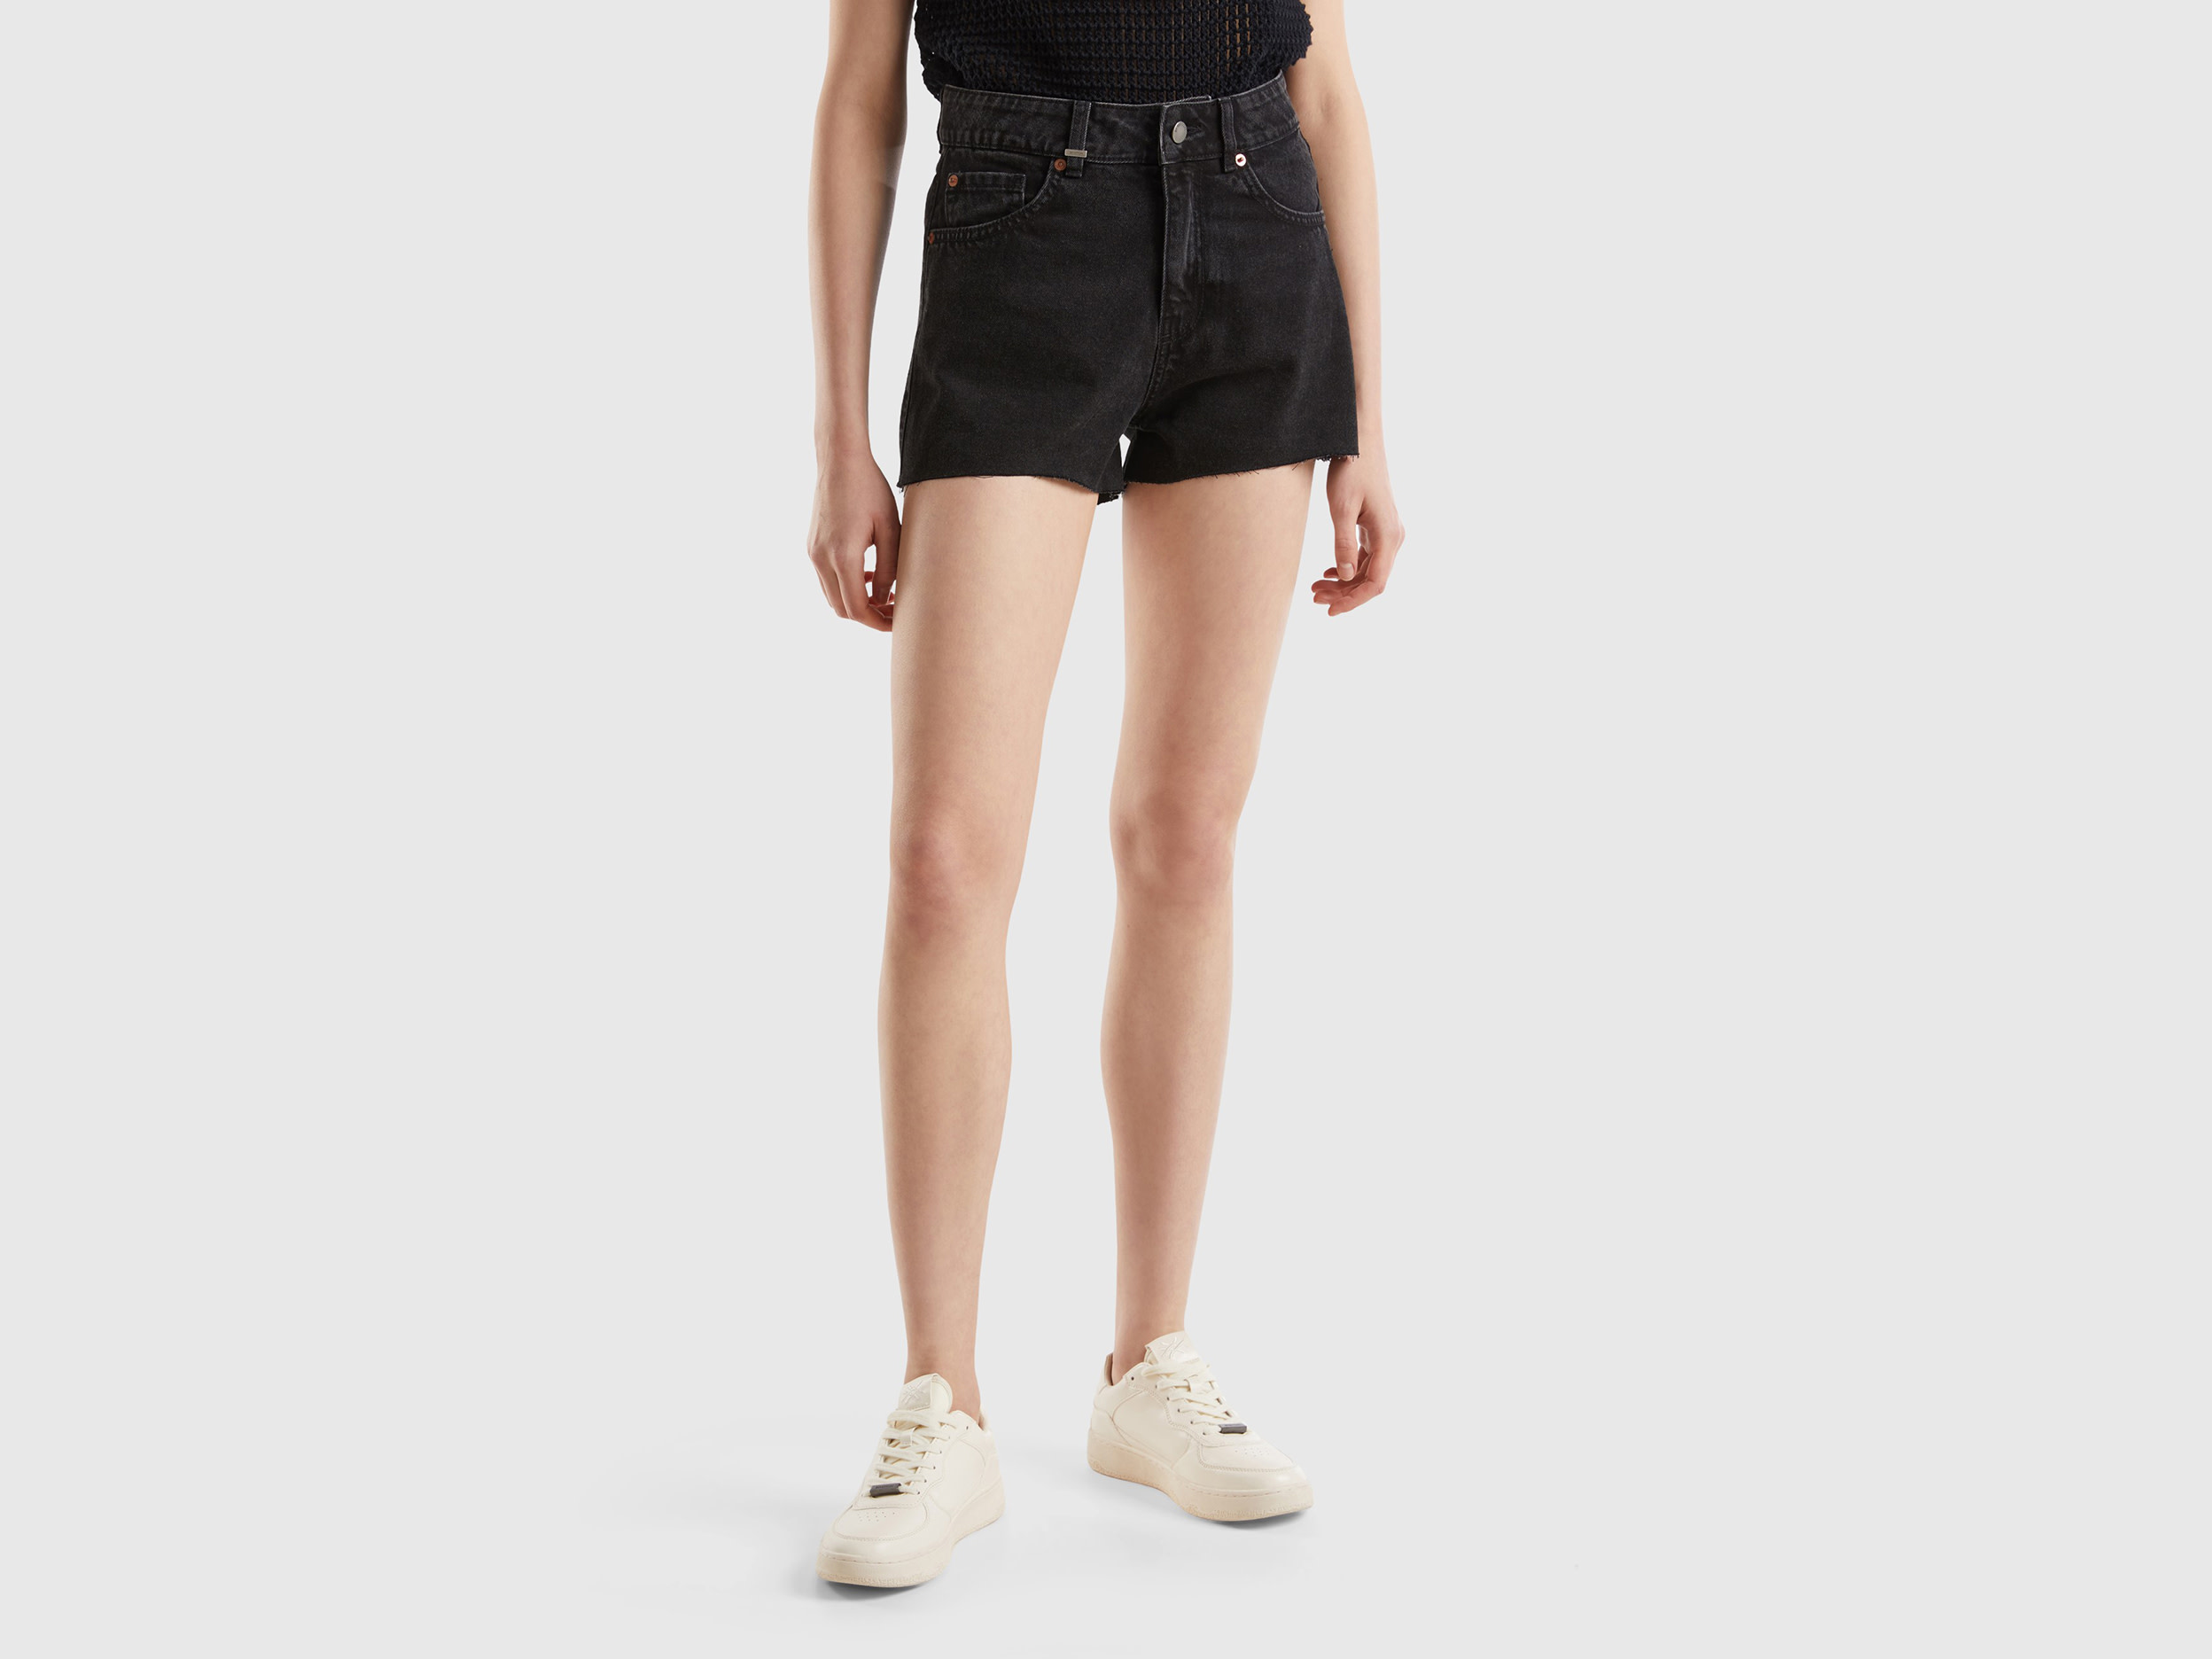 Image of Benetton, Frayed Shorts In Recycled Cotton Blend, size 26, Black, Women